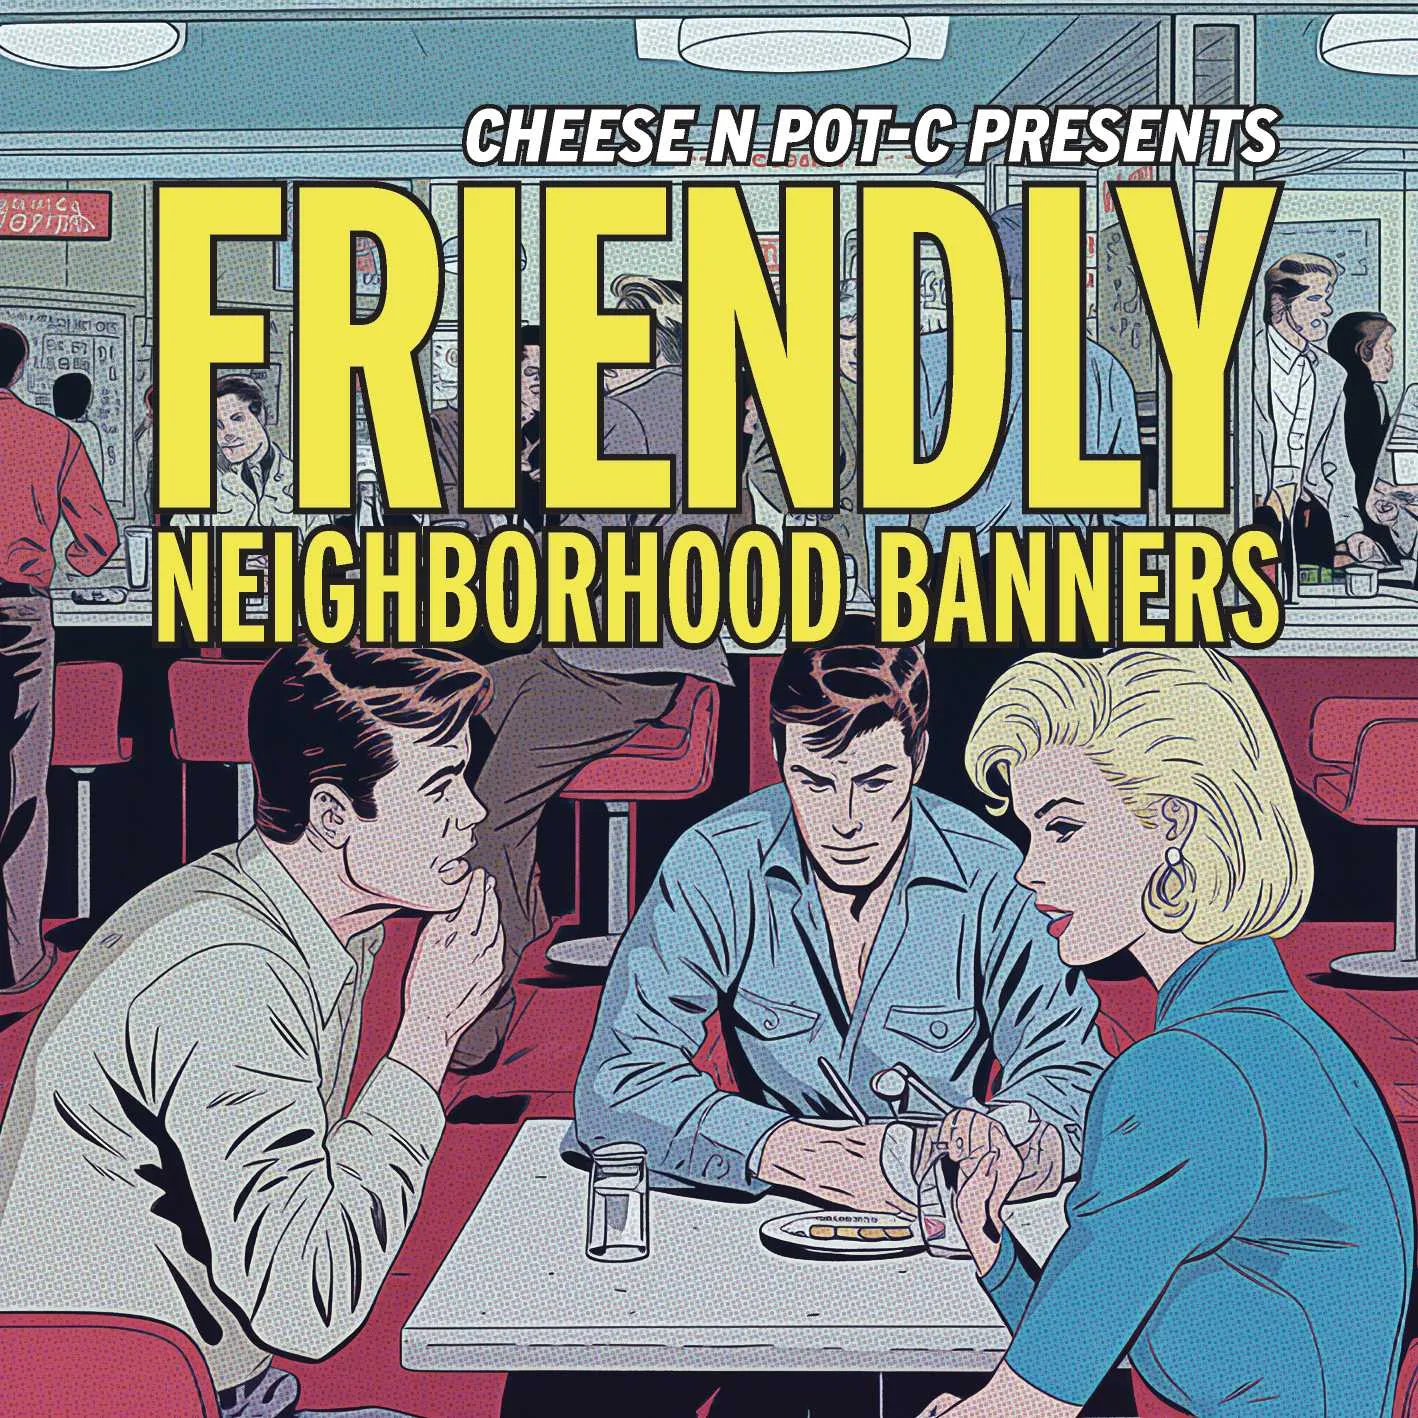 Album cover for “Friendly Neighborhood Banners” by Cheese N Pot-C